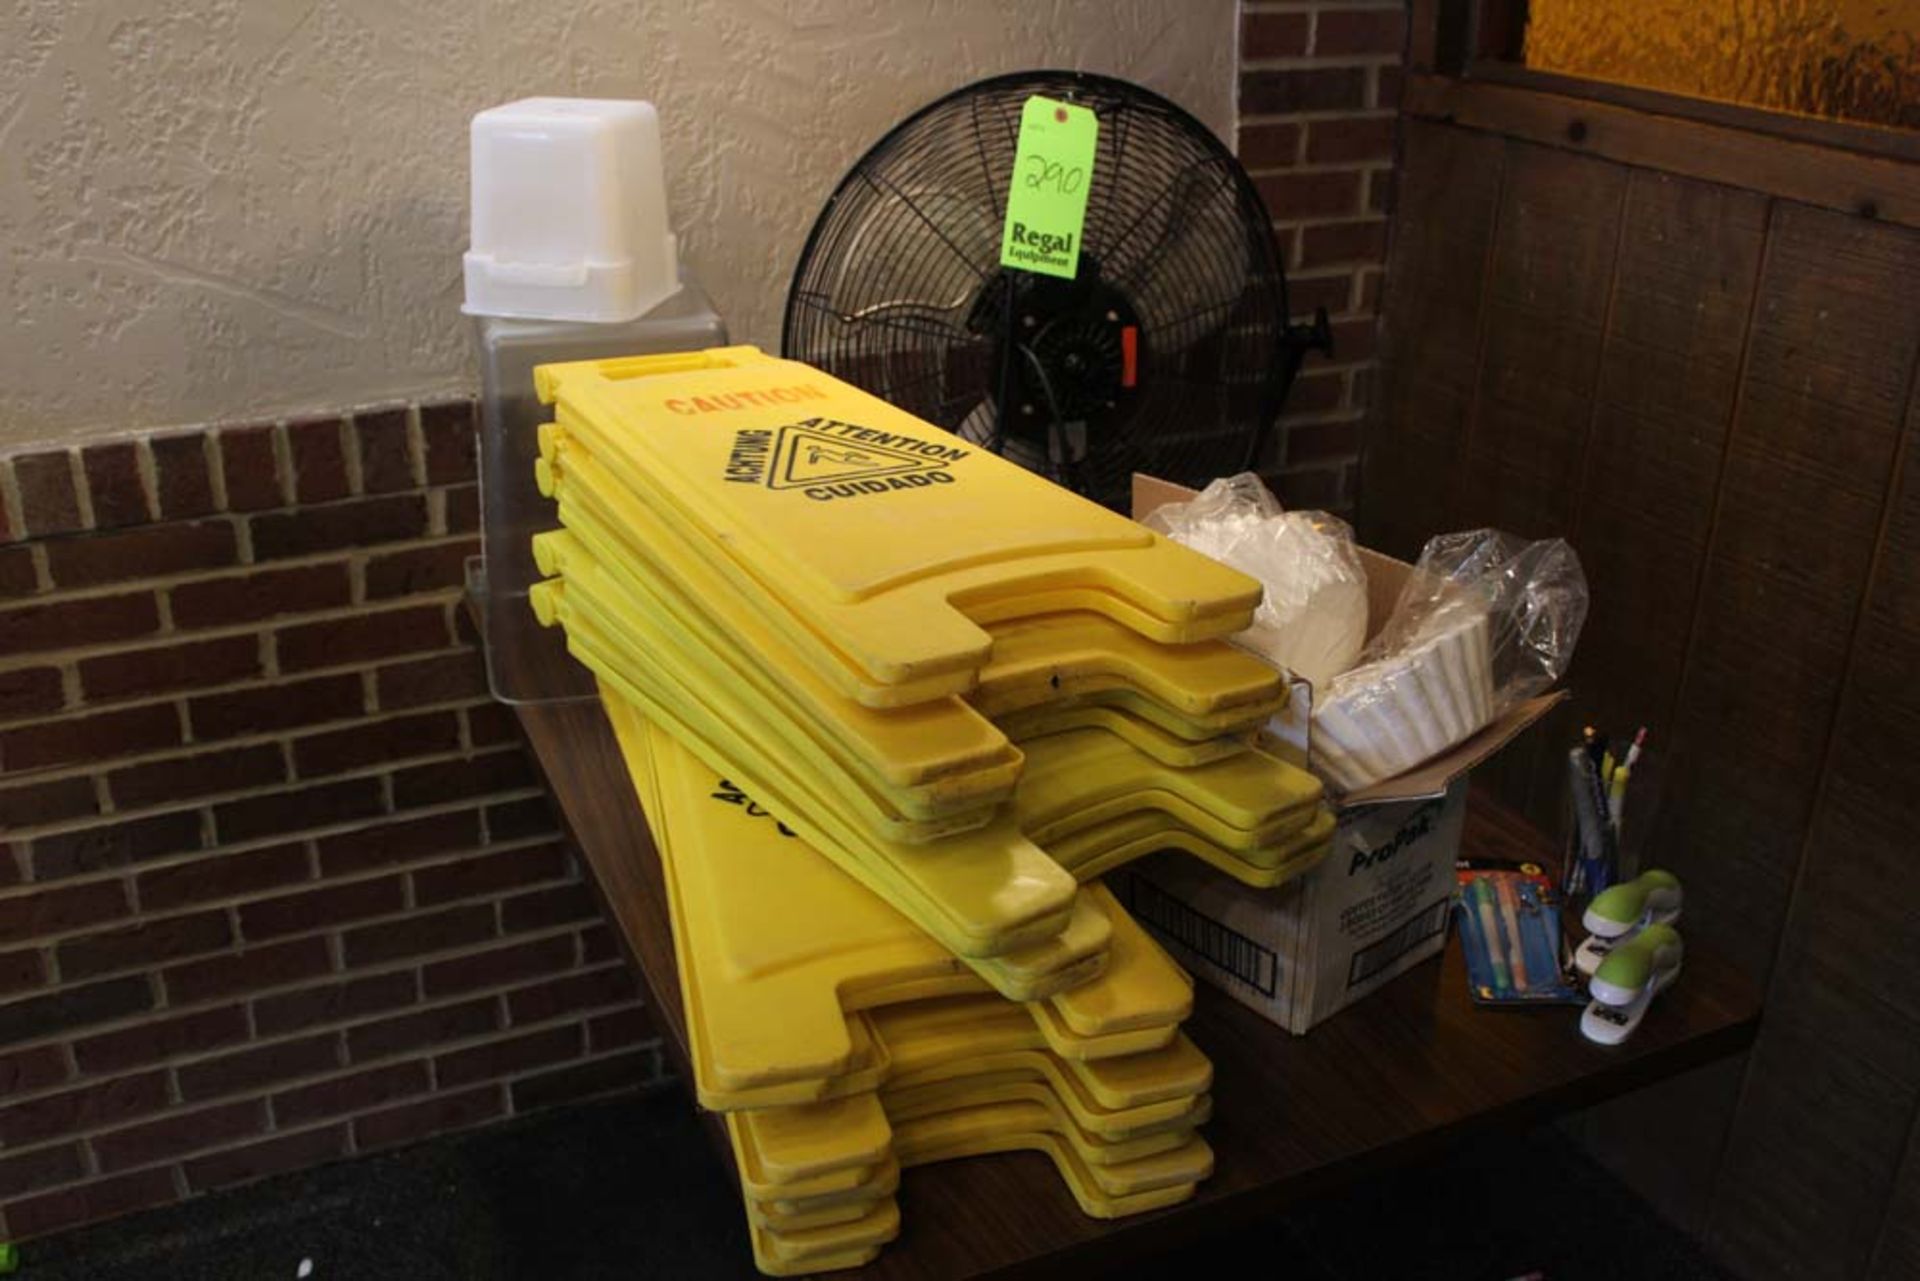 (10) Caution Slick Floor, Coffee Filters, Office Supply, Plastic Containers, Electric Fan